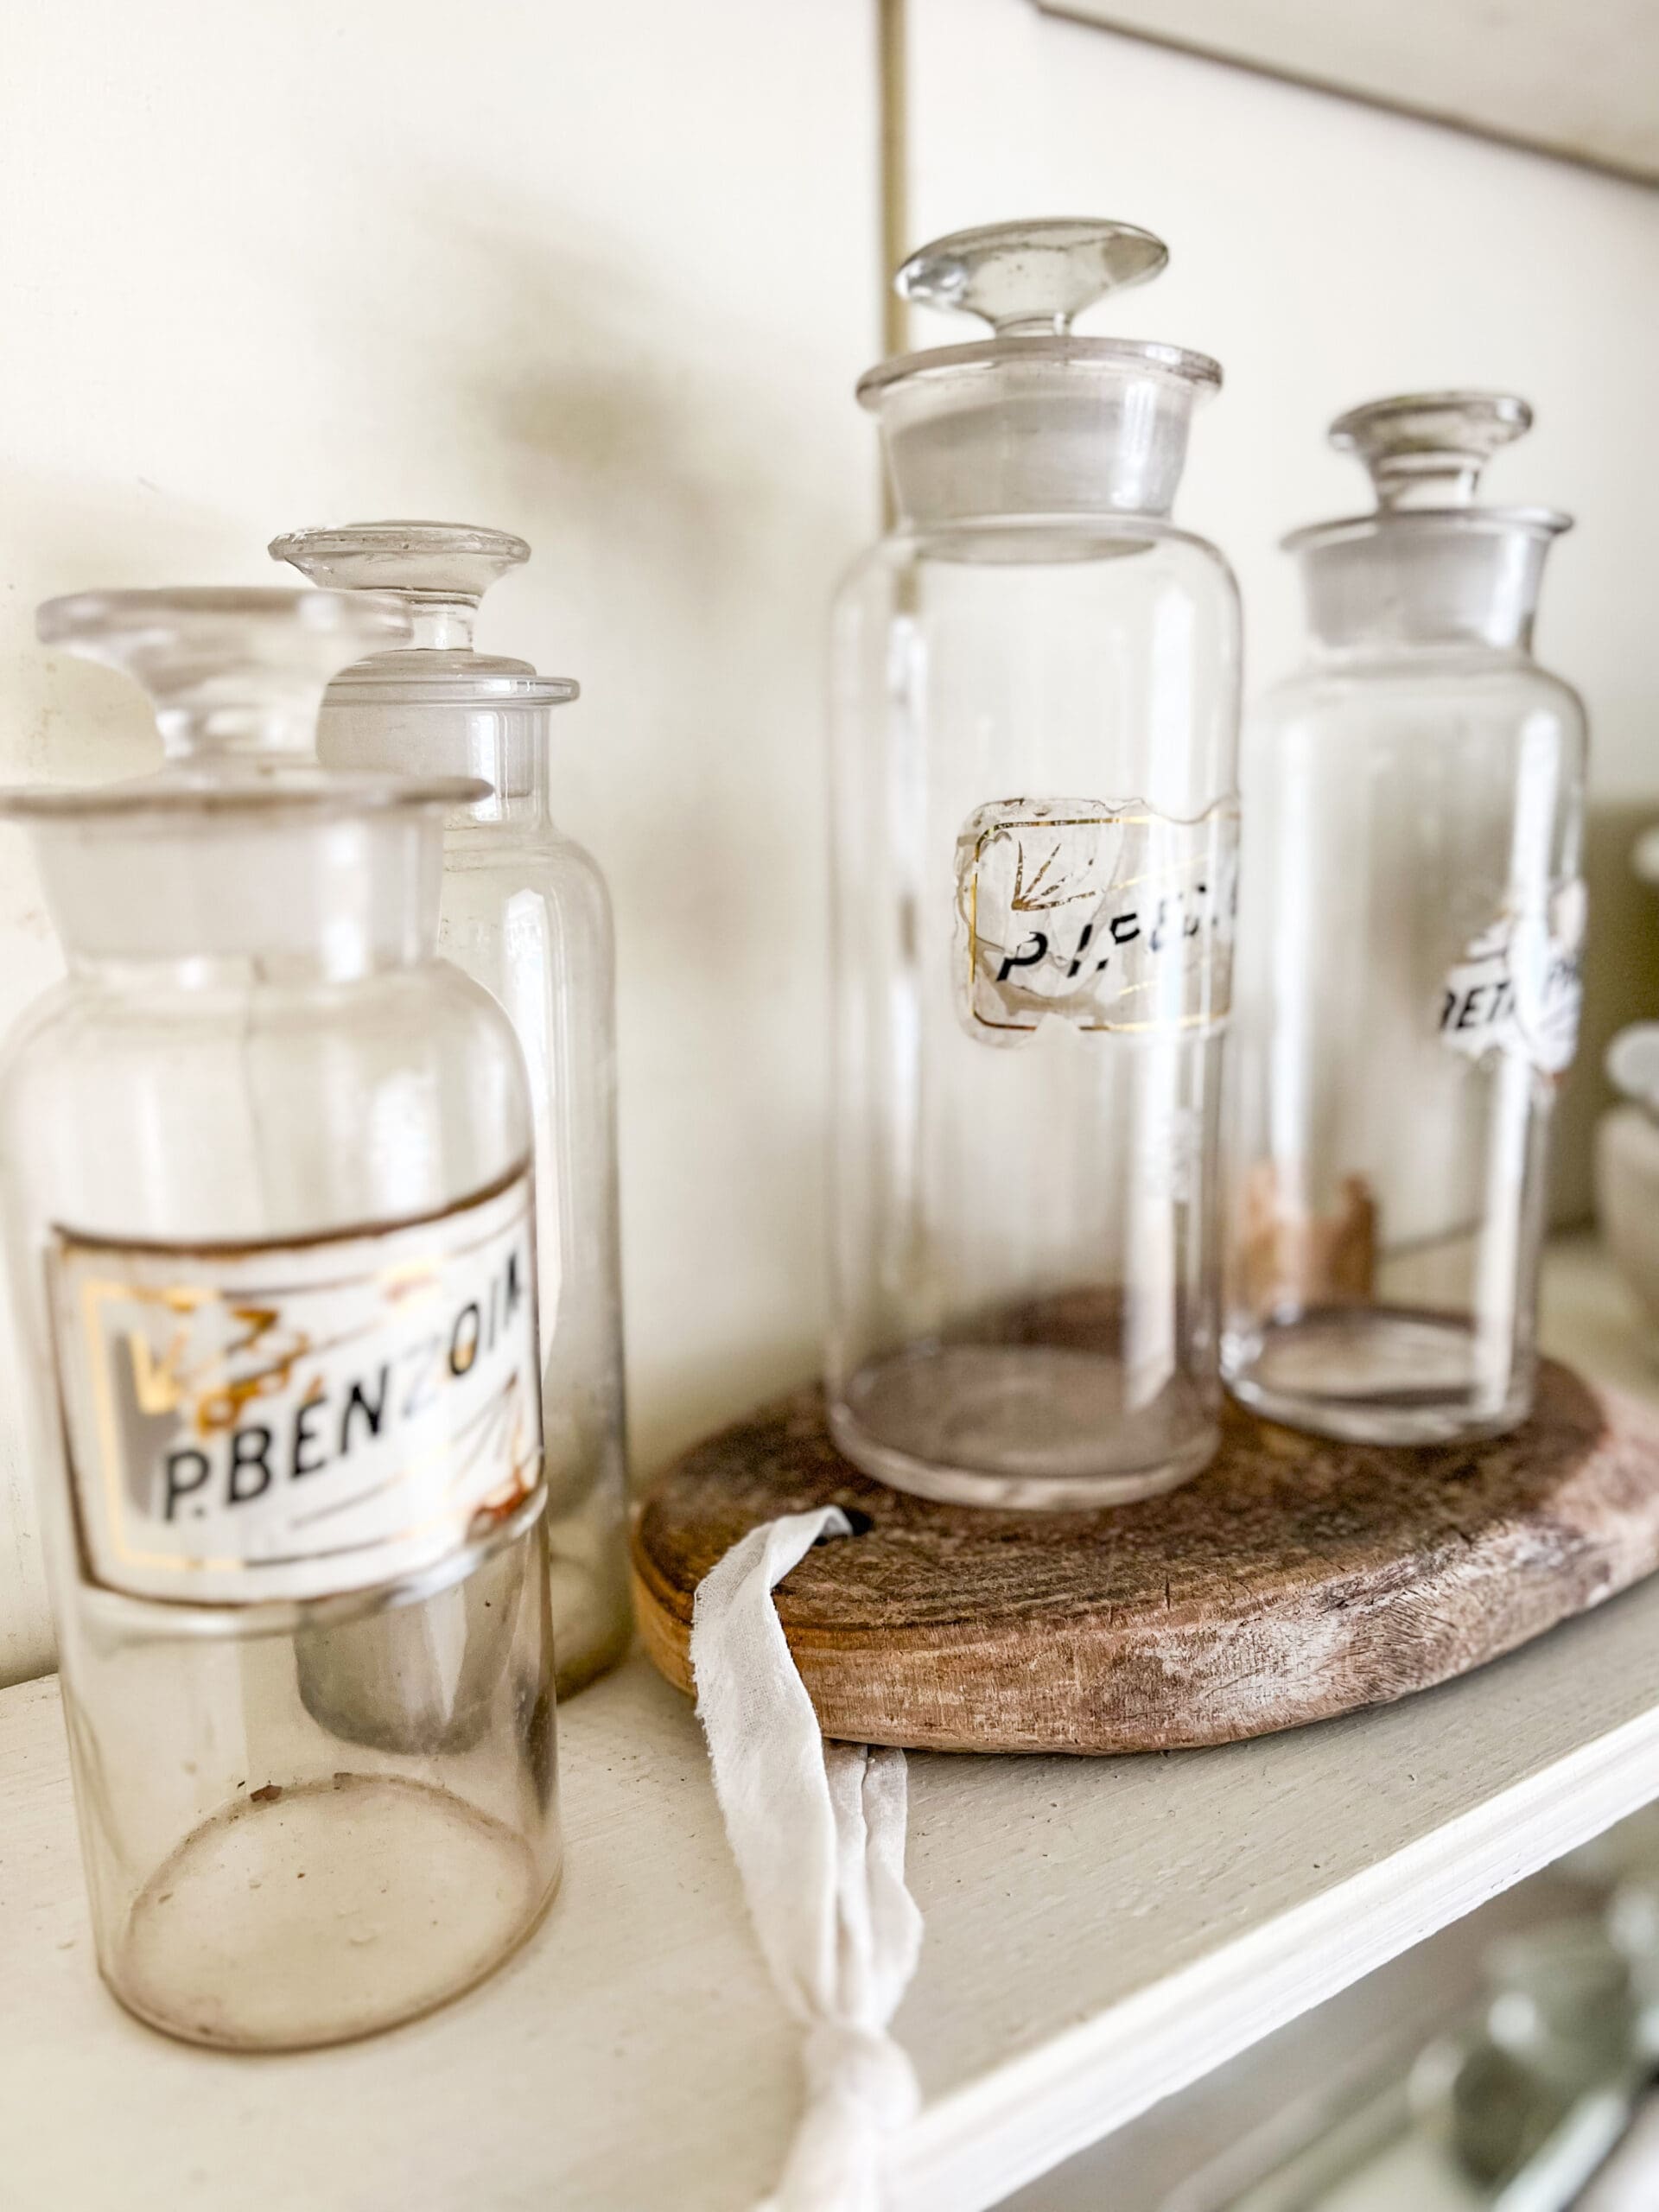 variously labeled vintage pharmaceutical glass bottles styled on an apothecary shelf